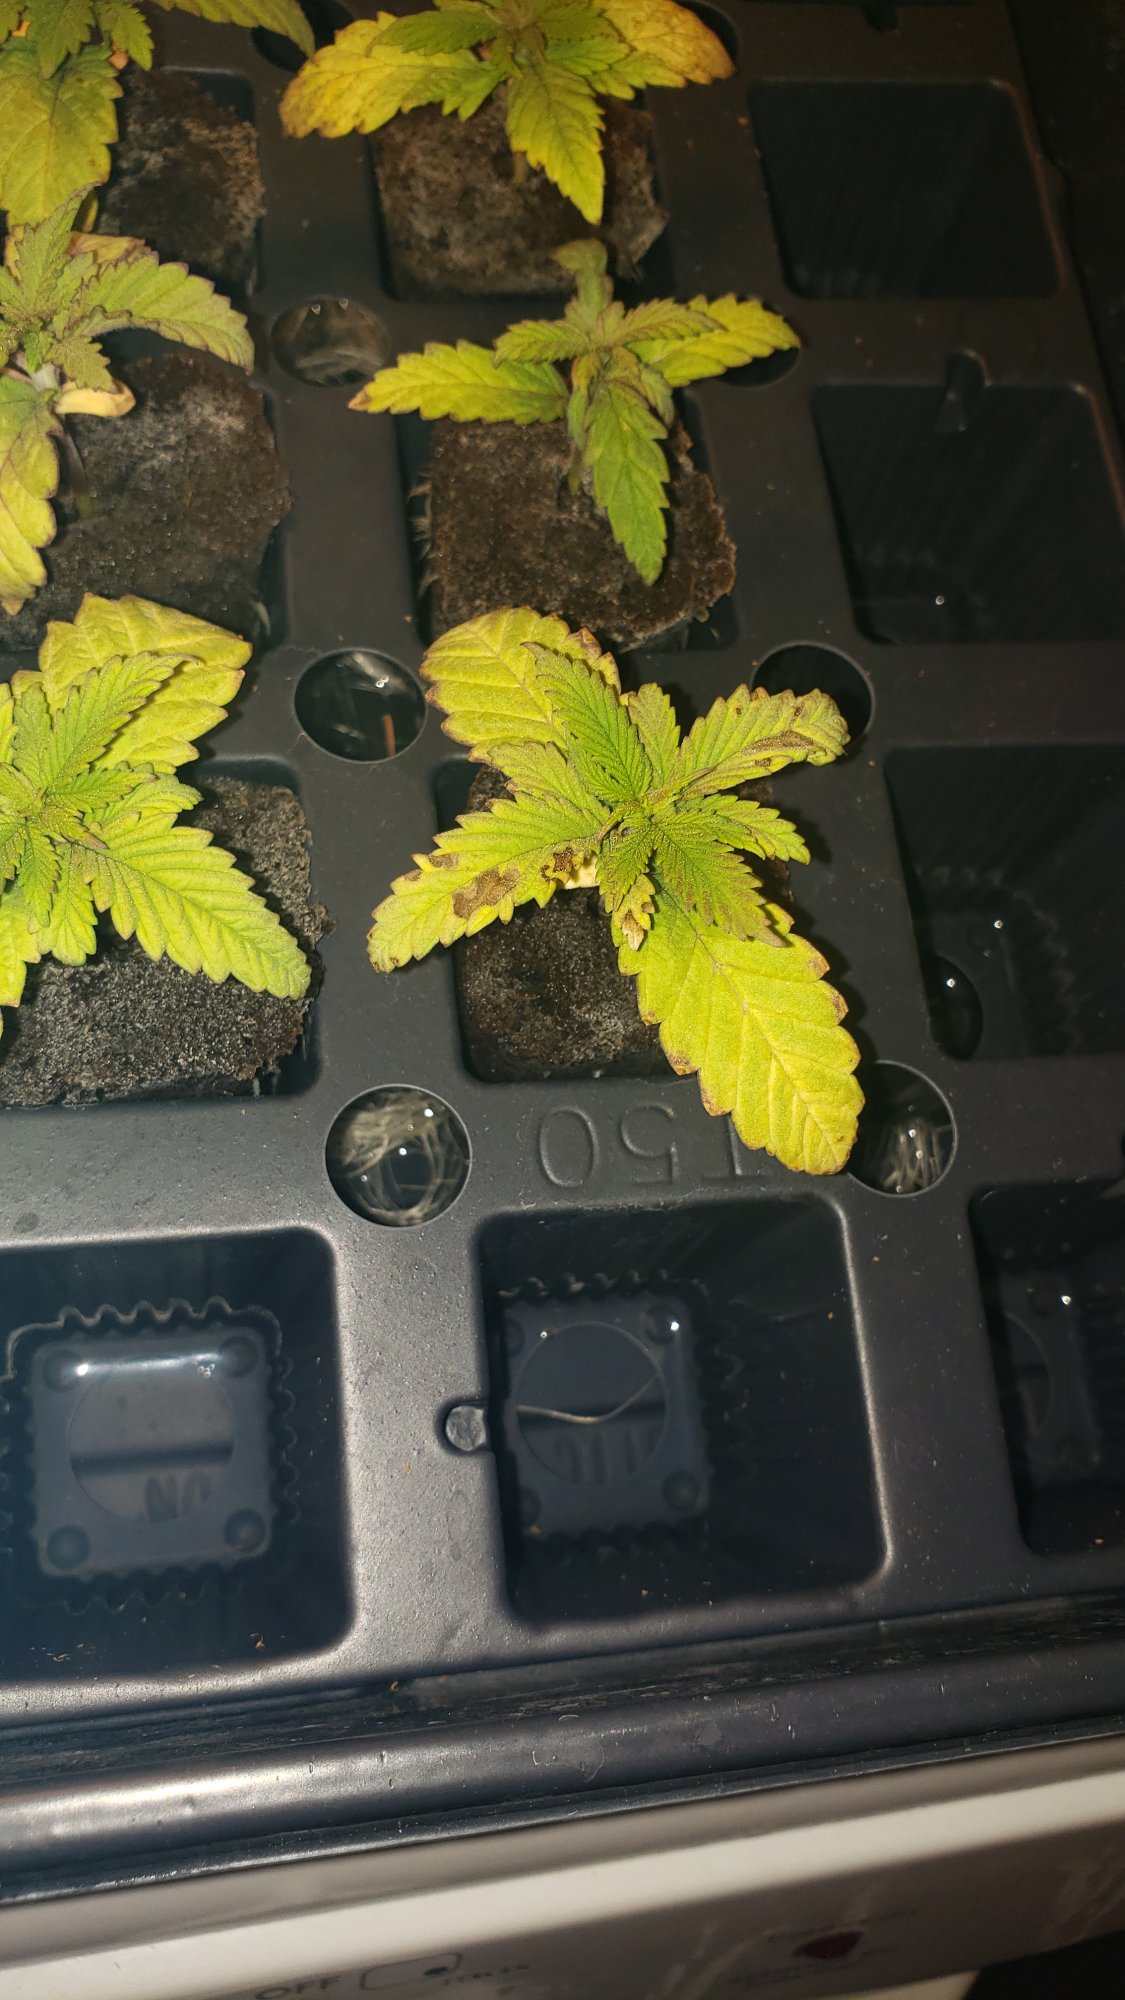 New to hydroponic farming needs help 2